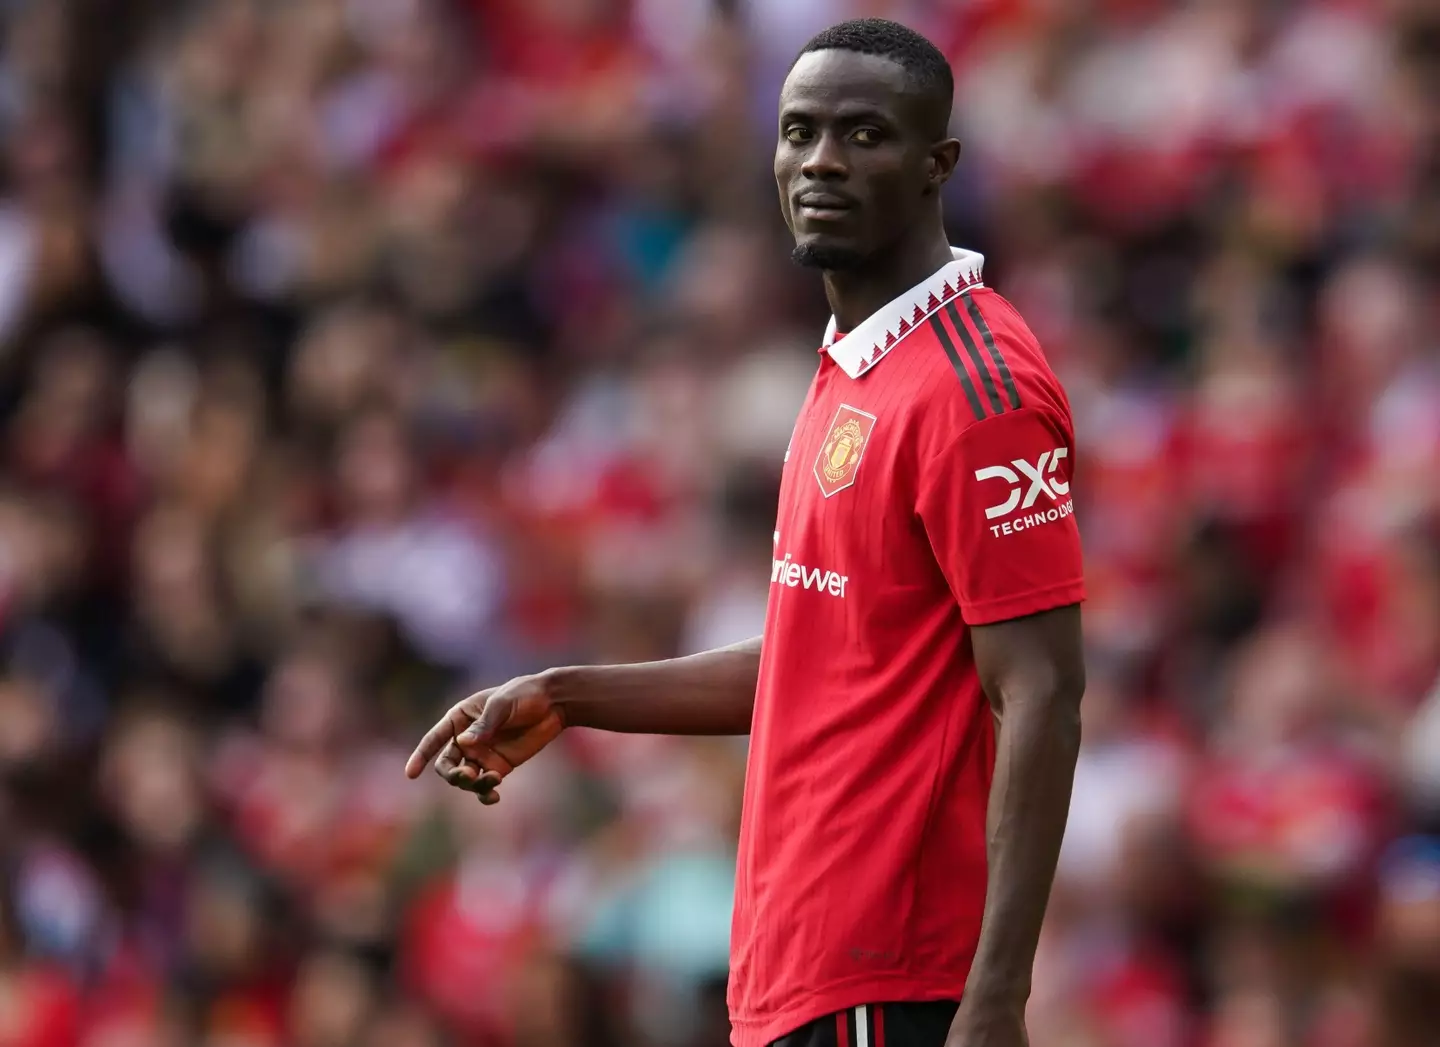 Bailly never held down a regular place in United's XI. Image: Alamy